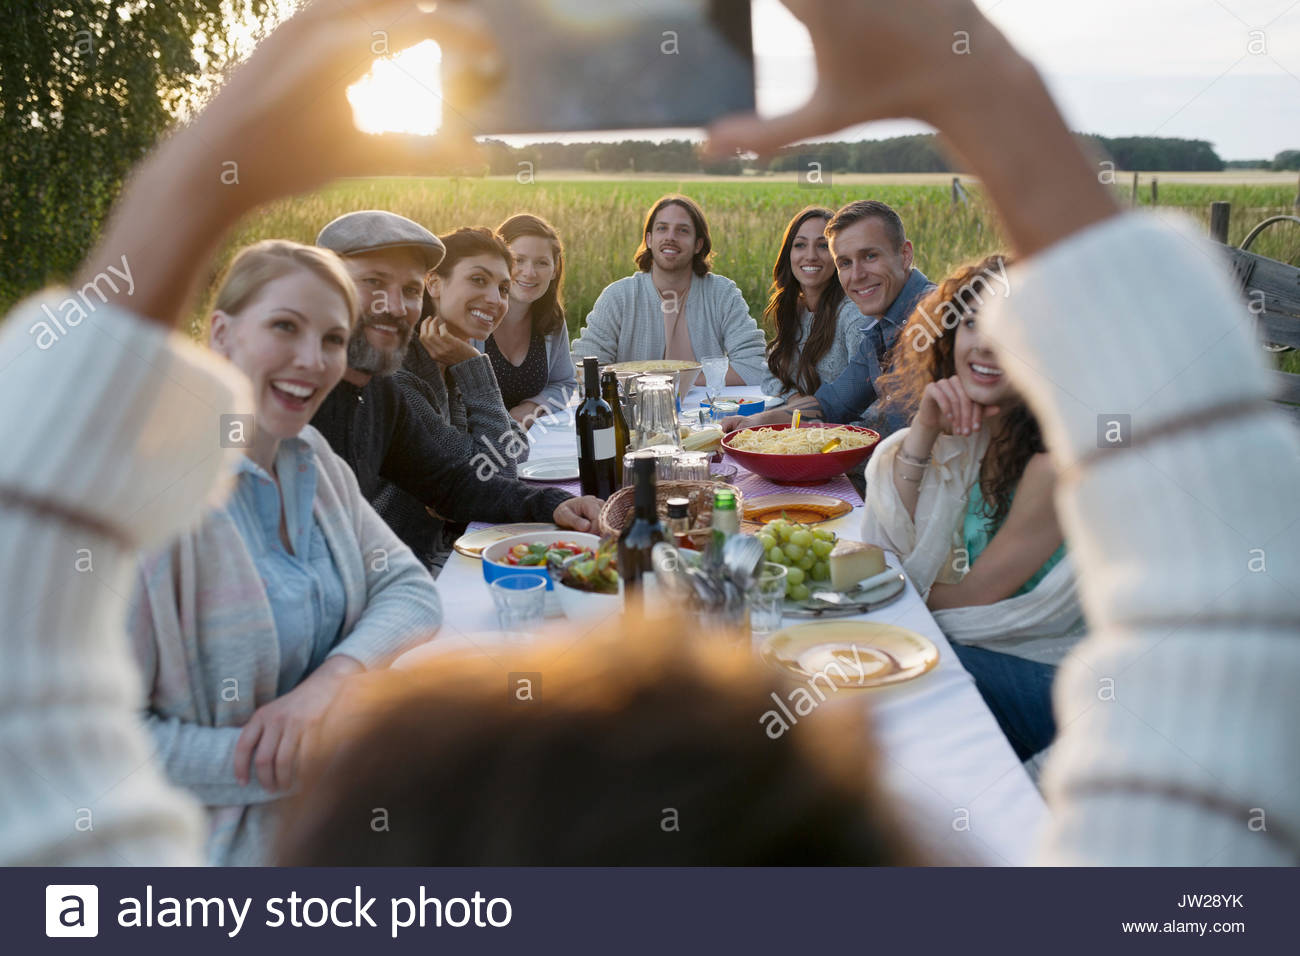 Woman with camera phone photographing friends enjoying garden dinner party in rural yard Stock Photo